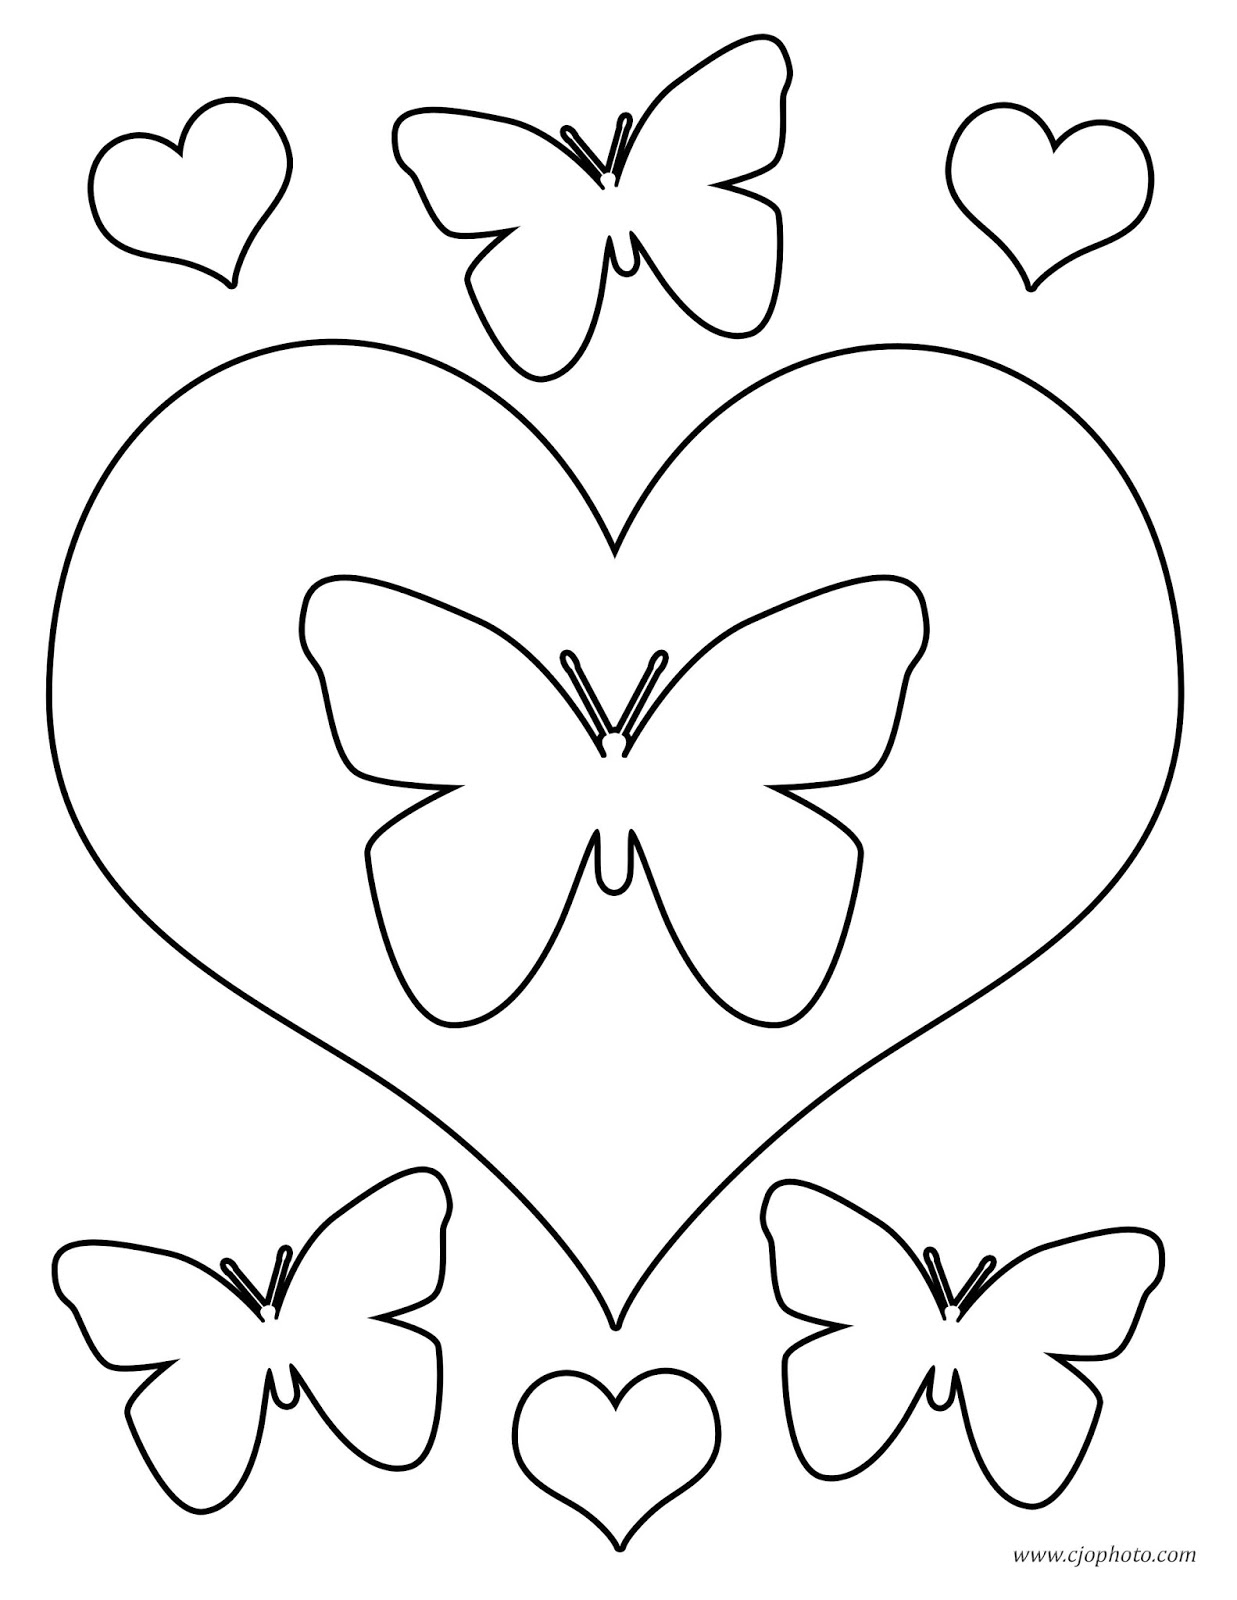 Cjo Photo Butterflies And Hearts Coloring Page